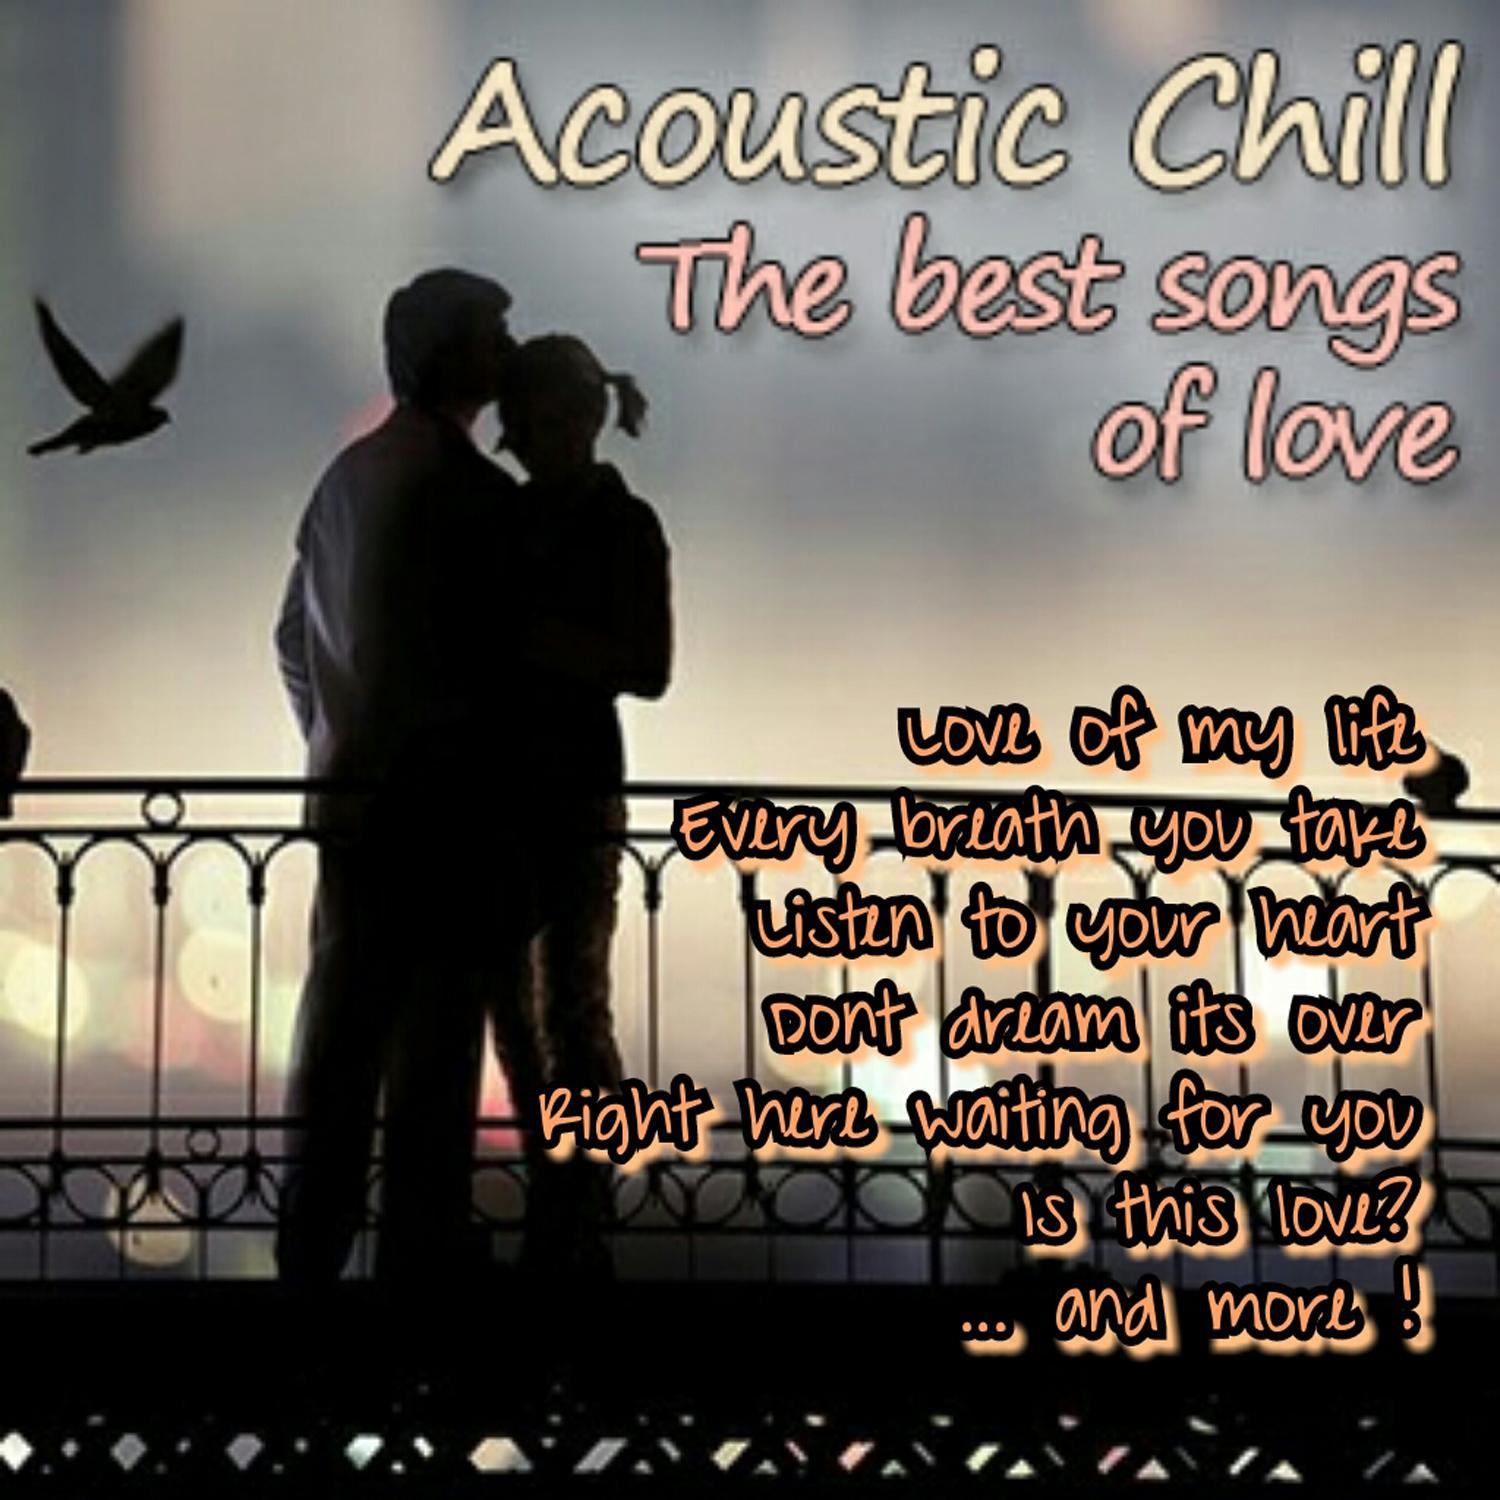 The Best Songs of Love